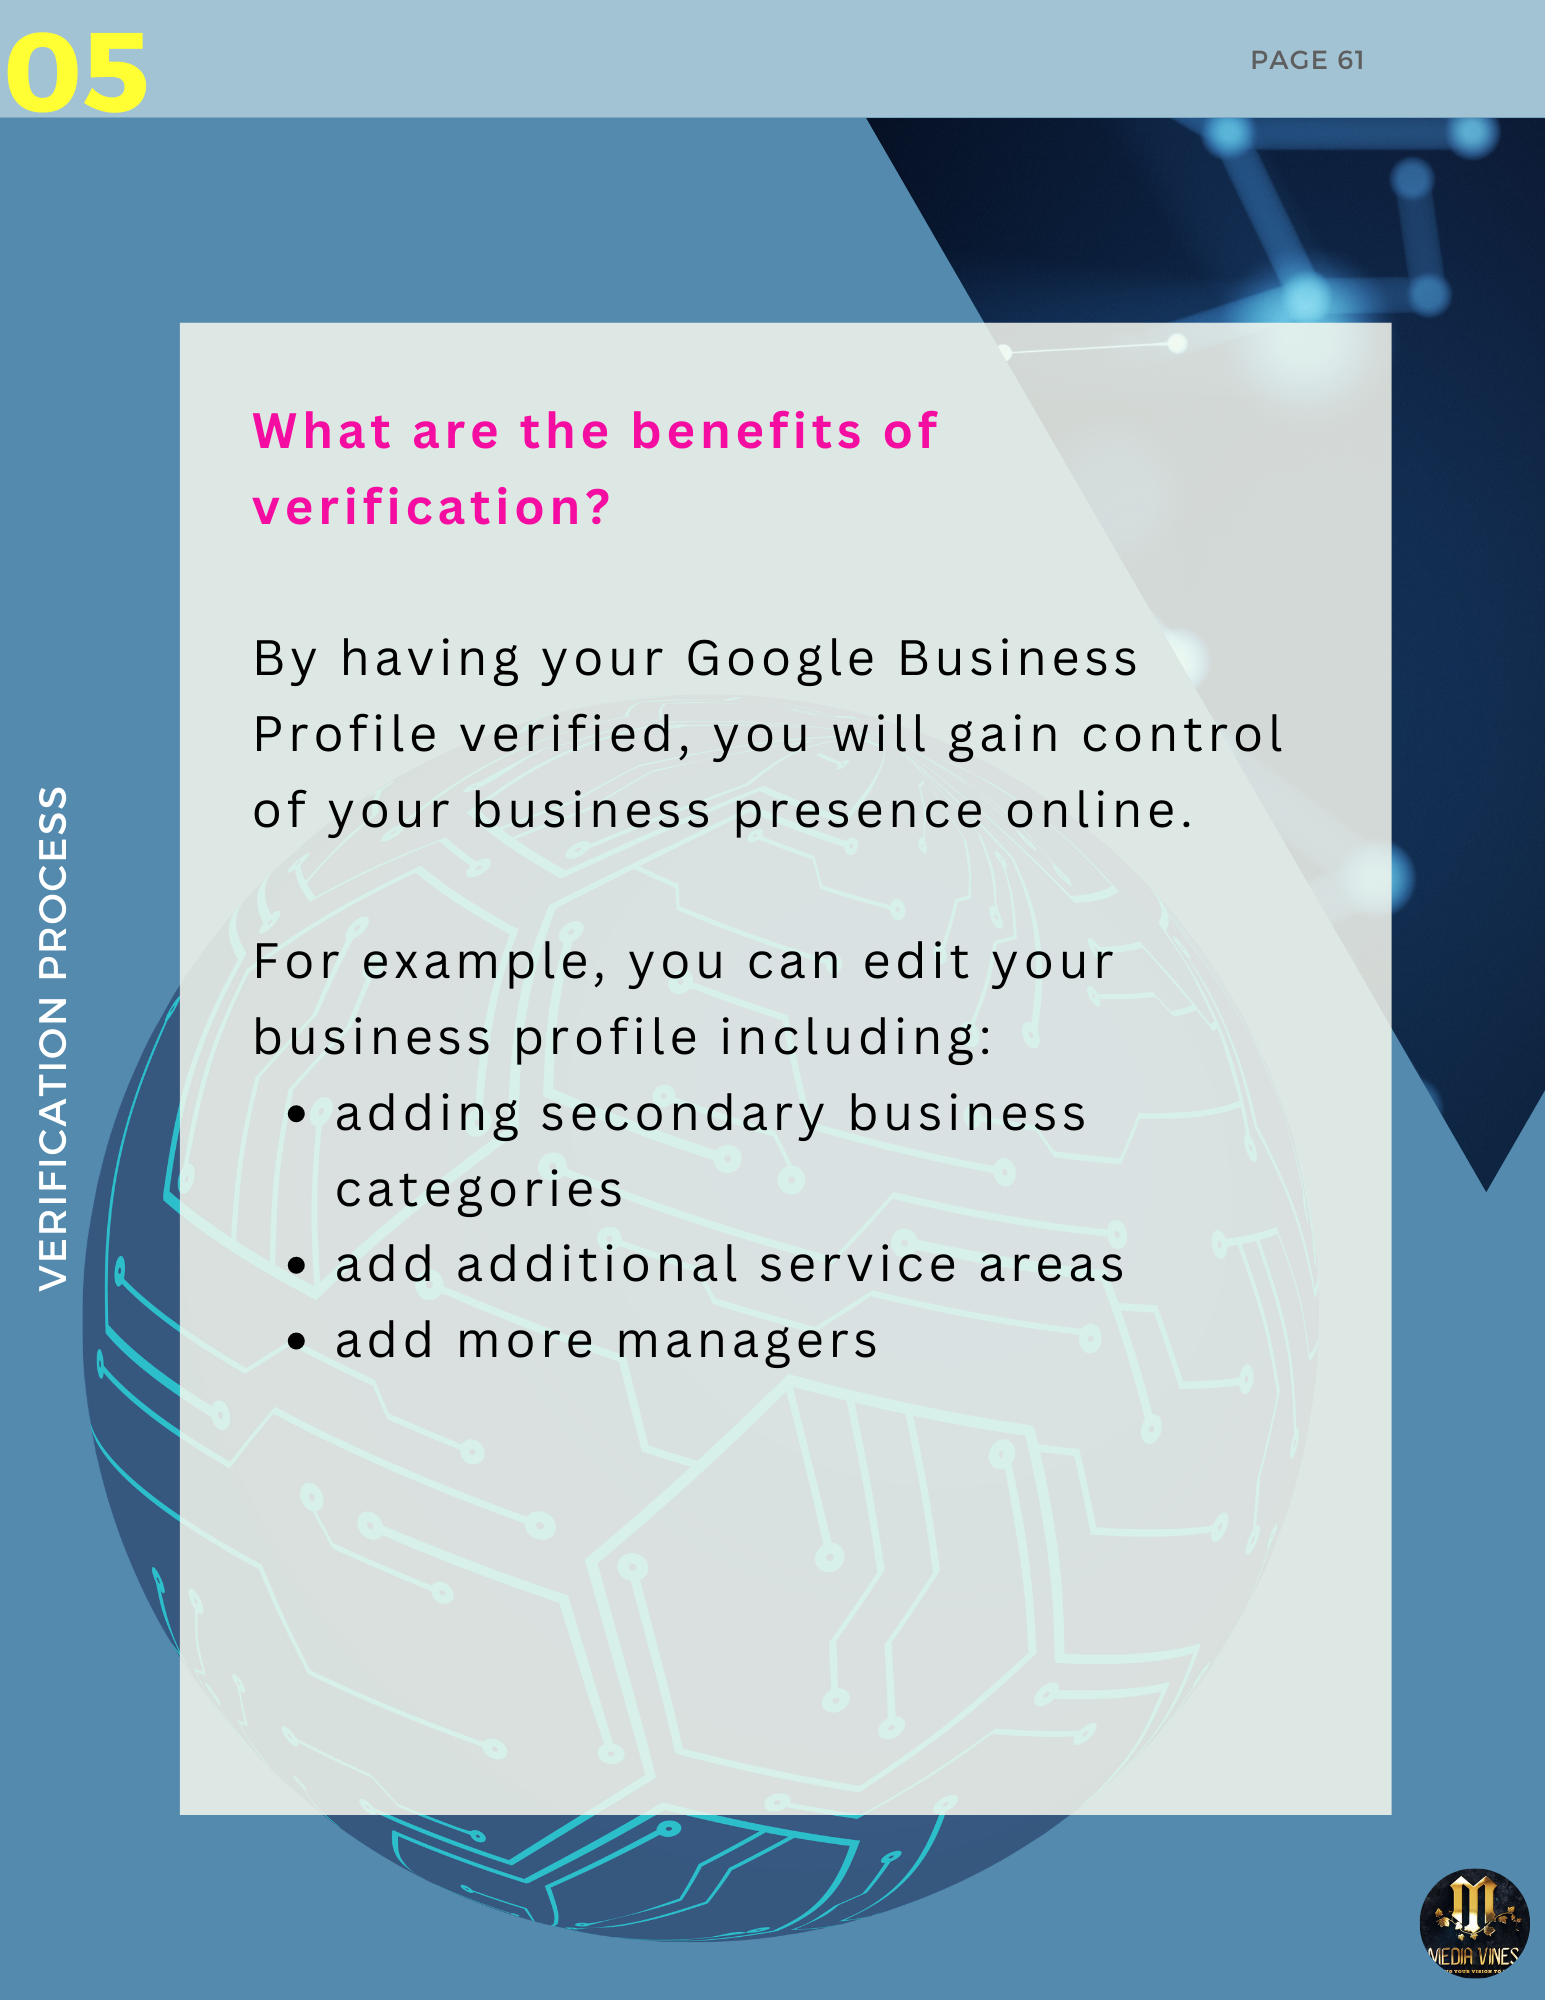 Benefits - Guide to Google Business Profile (GBP) - a DIY ebook for small business to get listed on GBP by Media Vines Corp of Kihei, HI